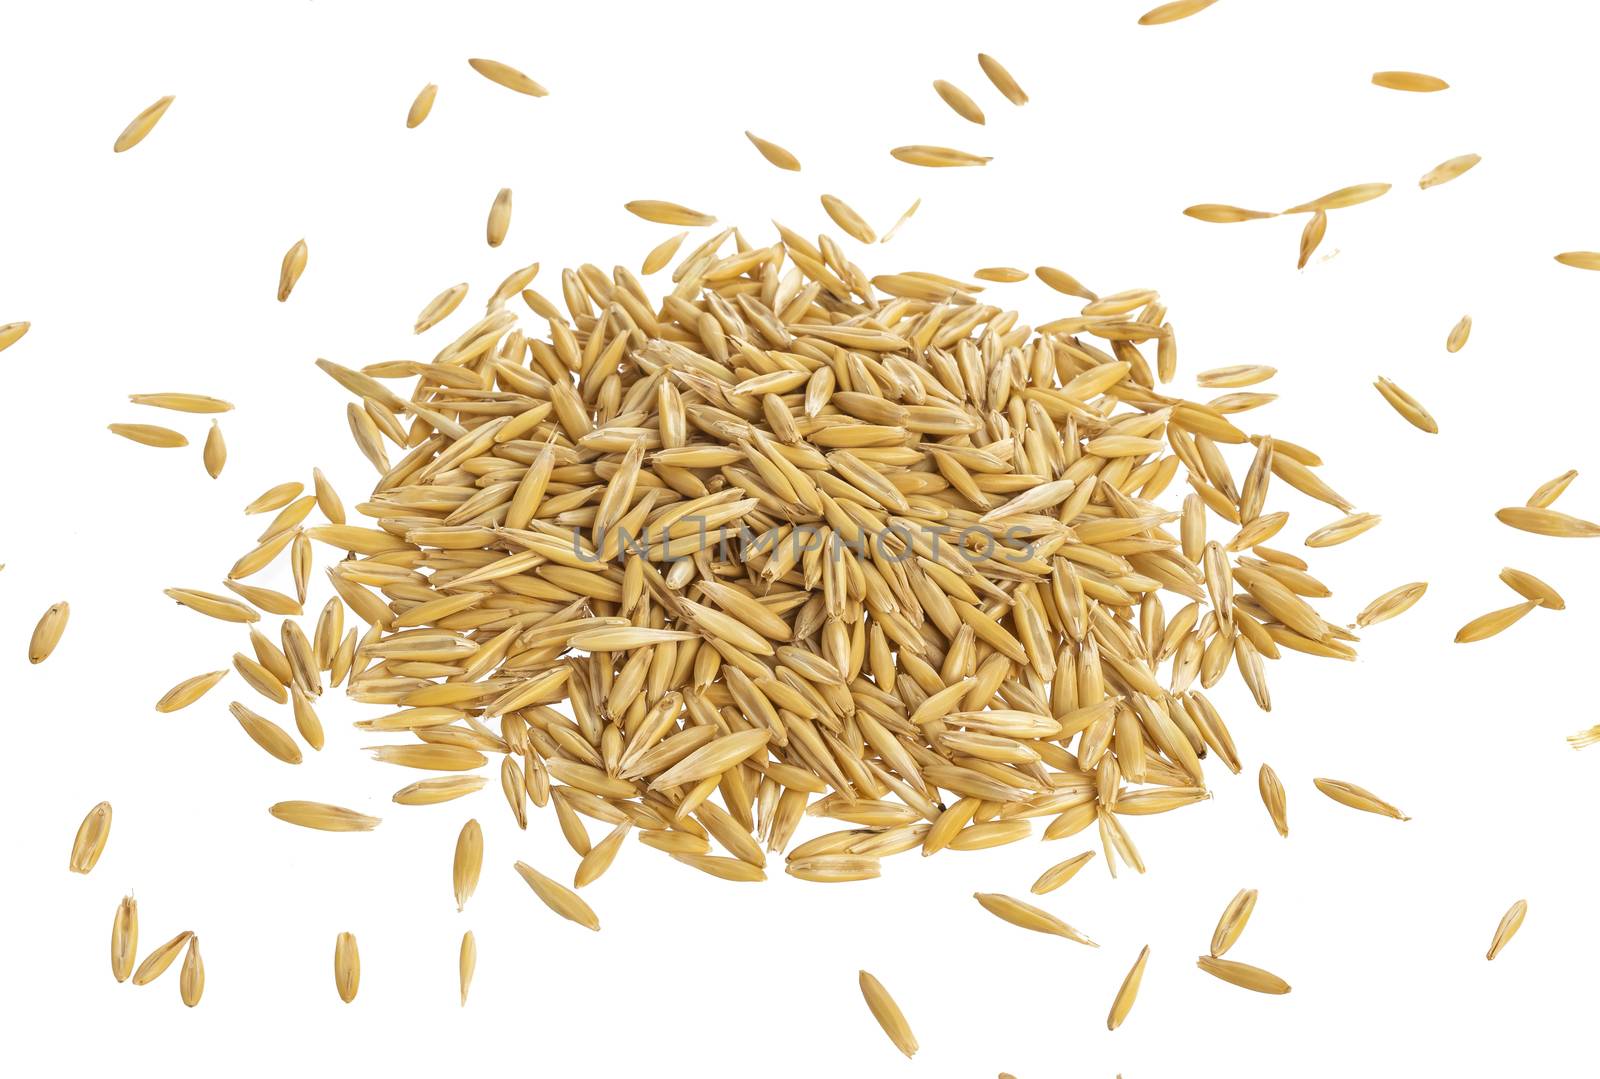 Pile of oat seeds isolated on white background, top view, grain of oats